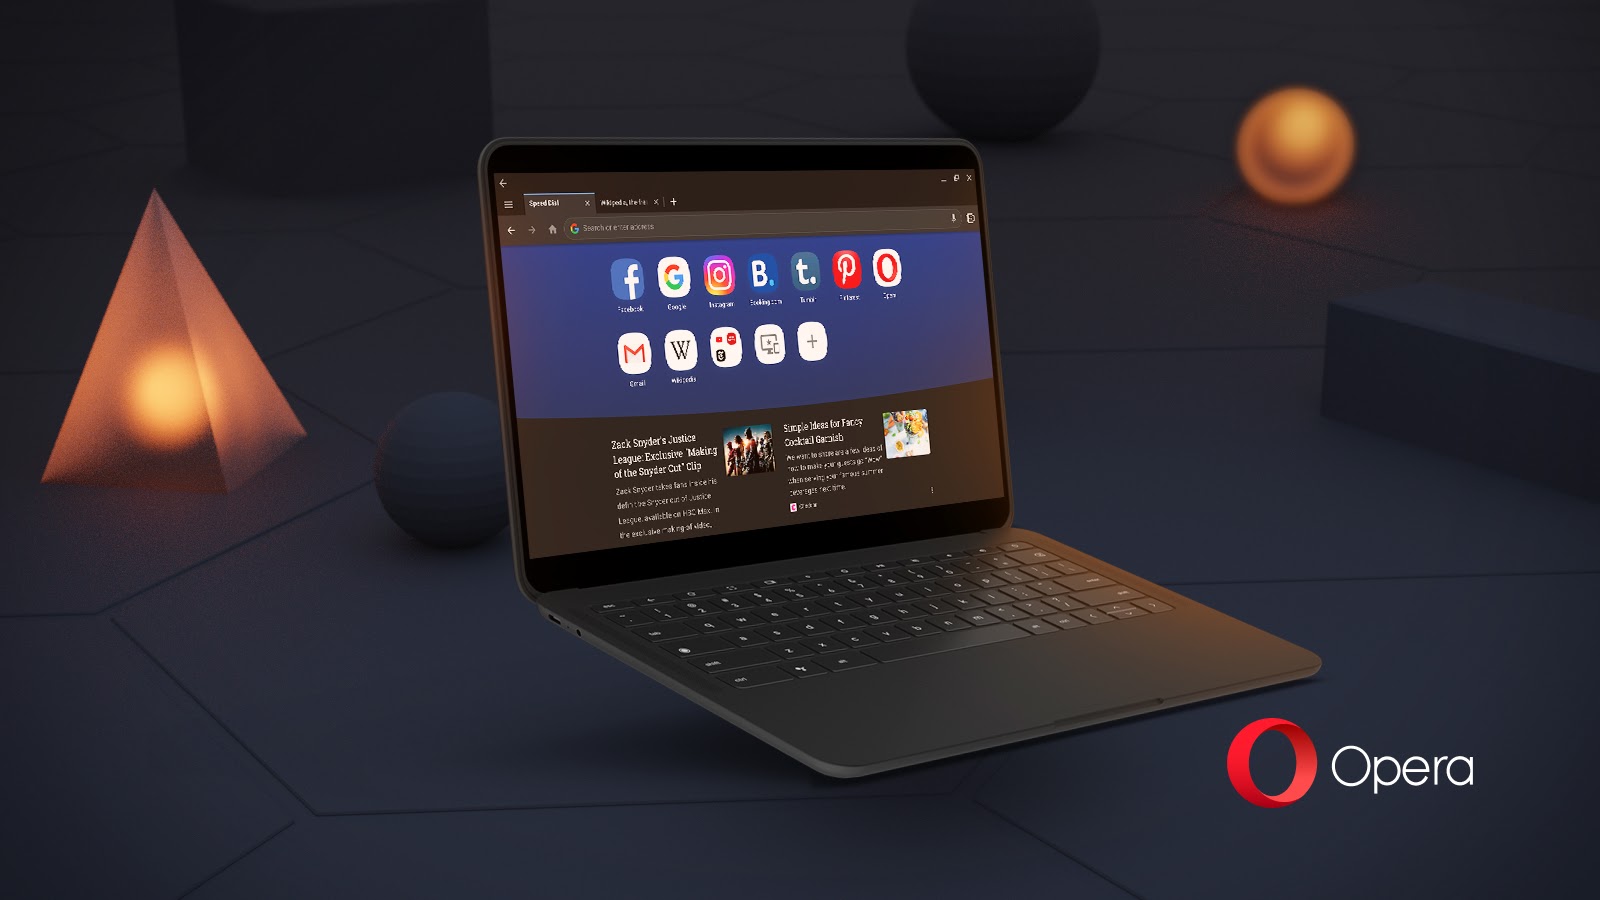 Opera for Chromebook brings built-in messengers, free VPN and more features